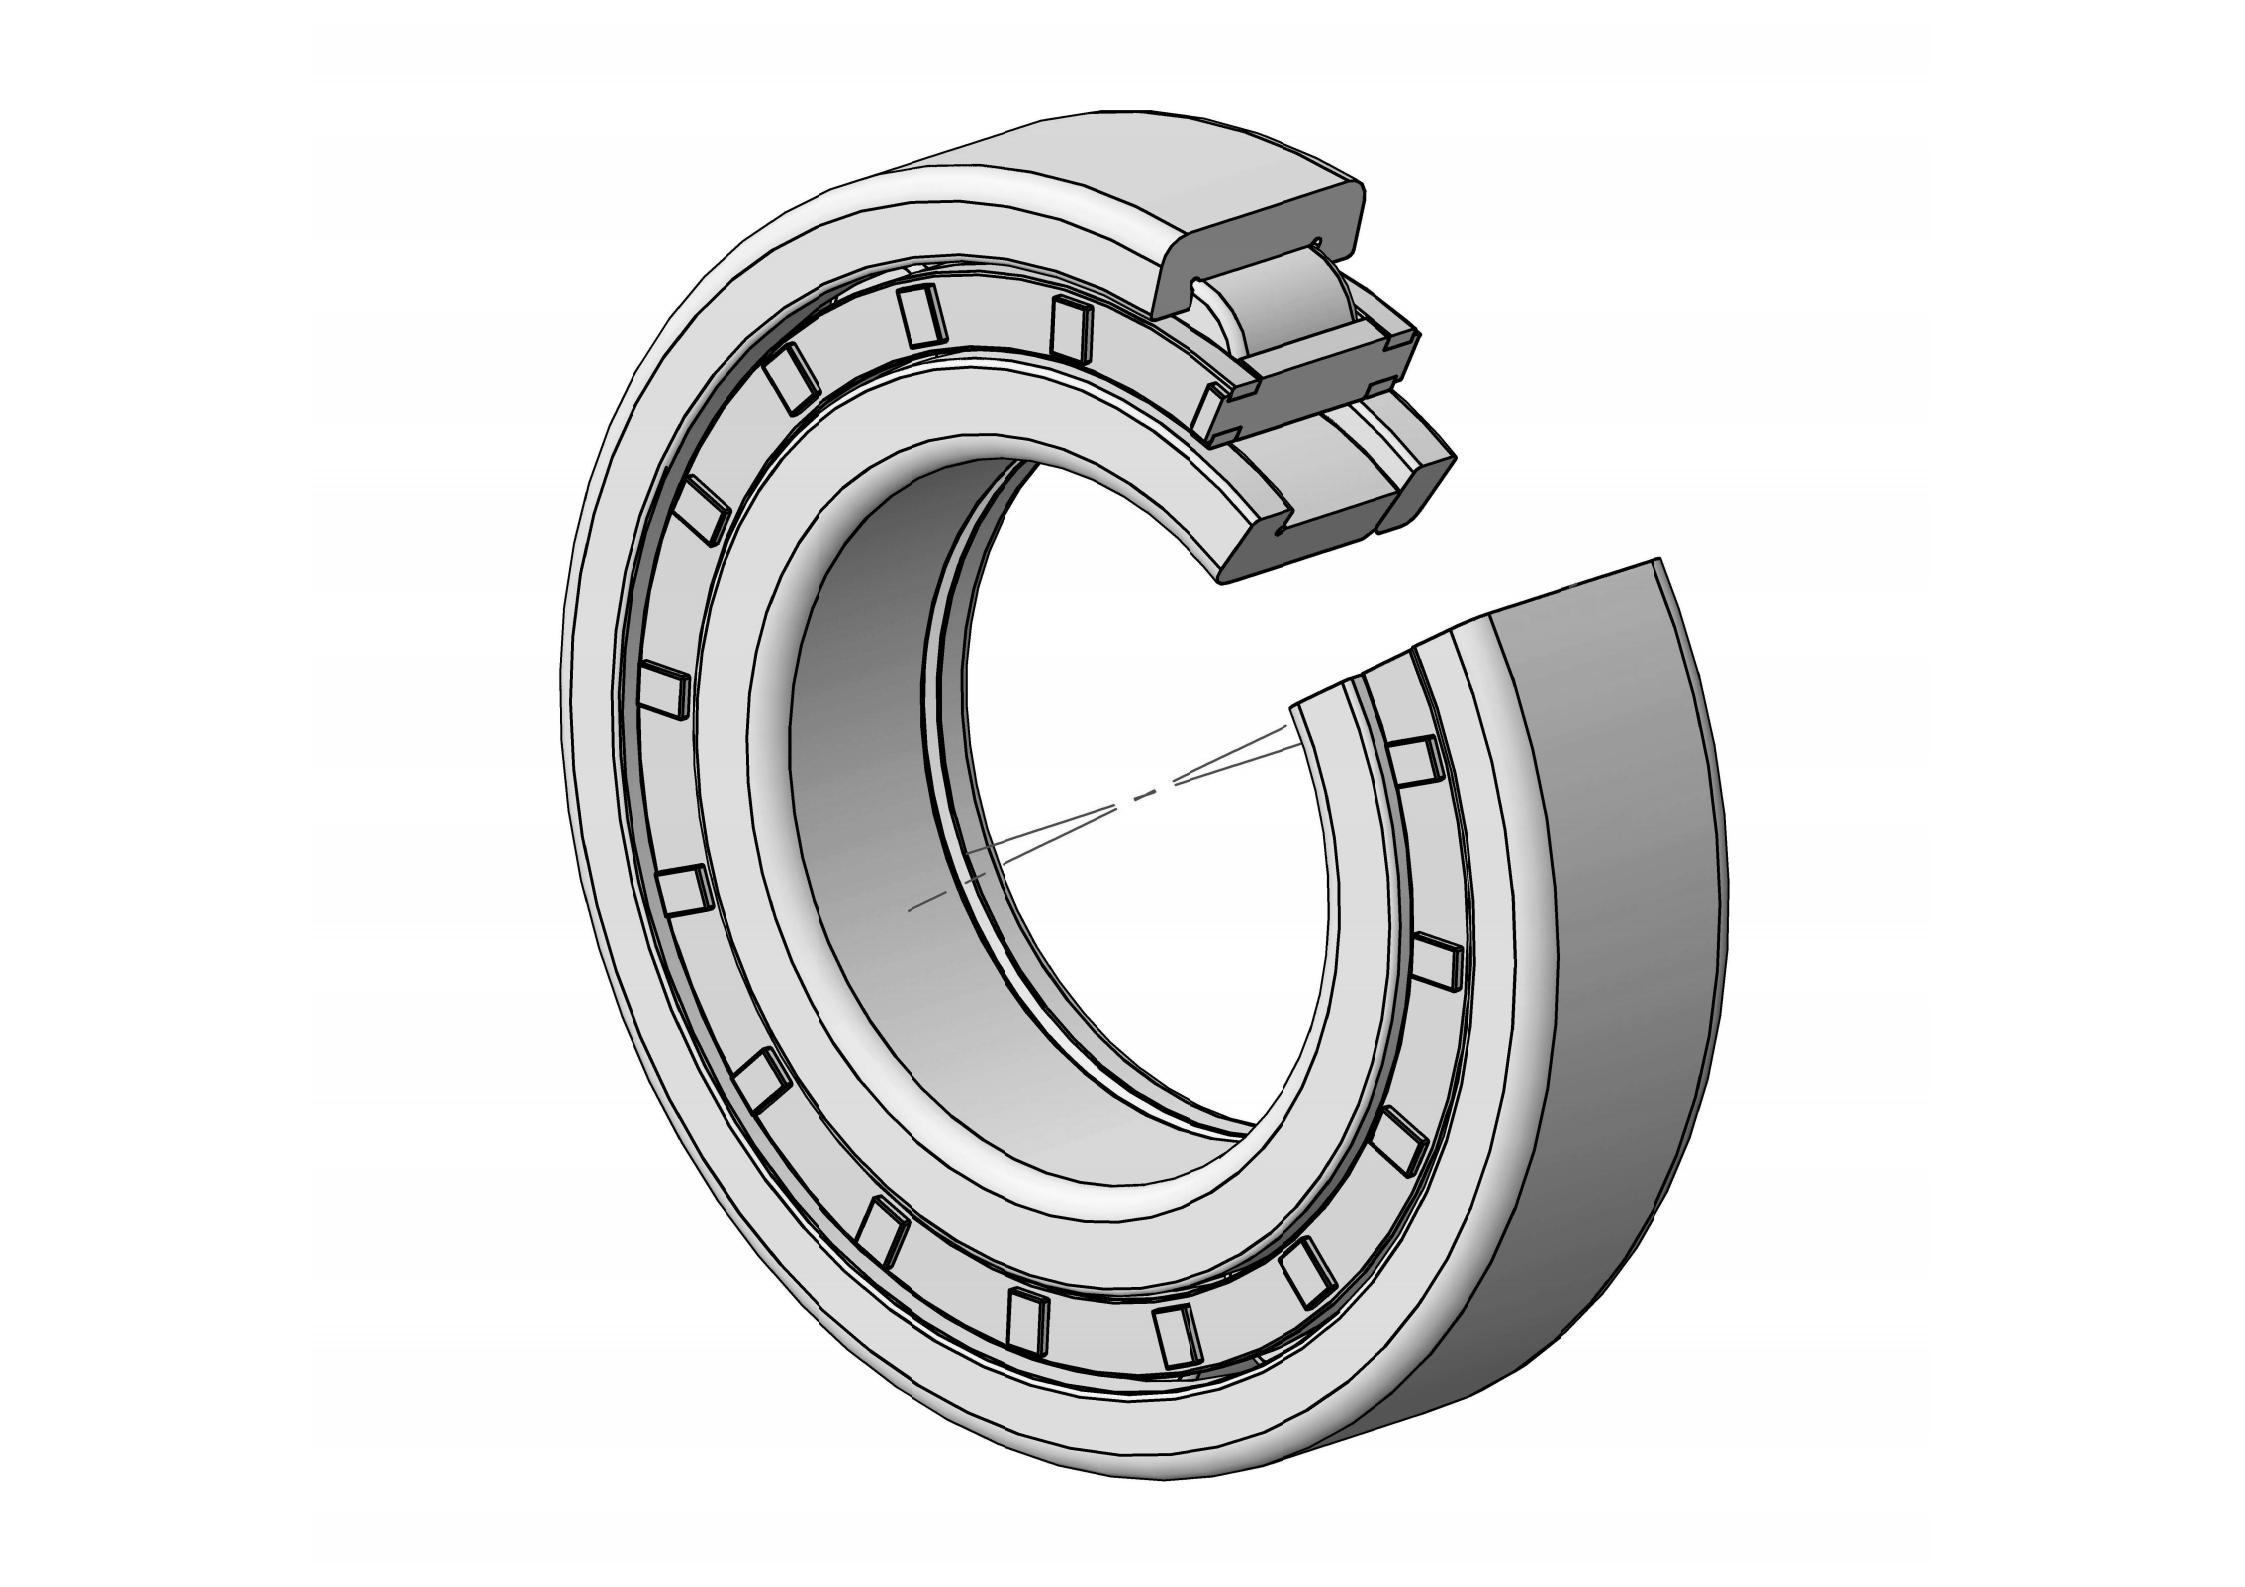 NUP317-EM Single Row Cylindrical roller bearing 